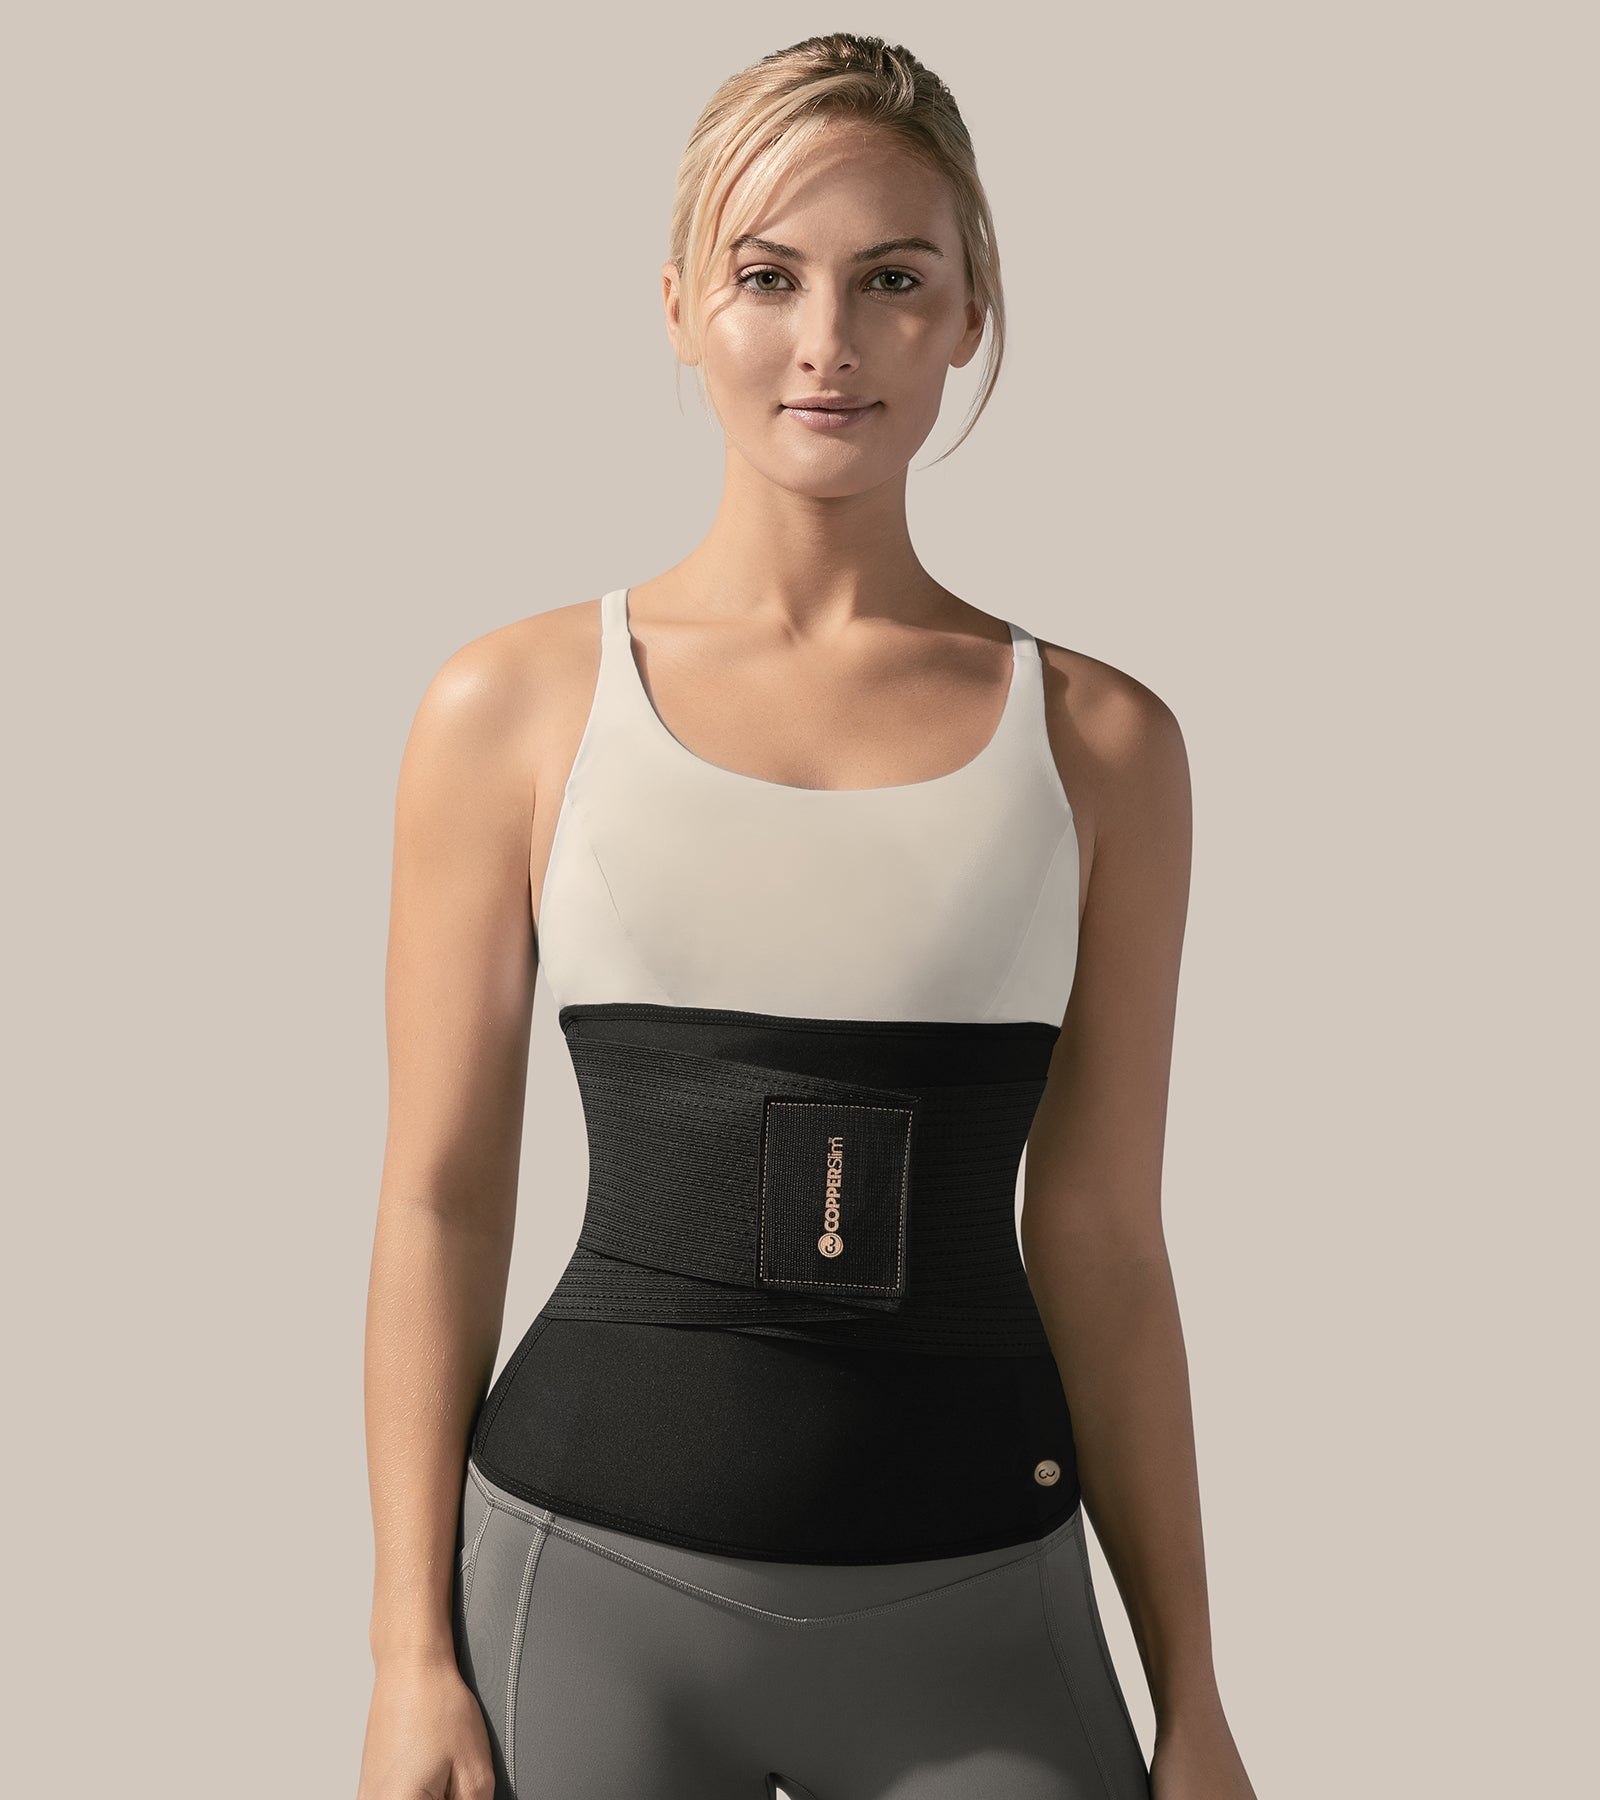 Wholesale cami hot waist cincher To Create Slim And Fit Looking